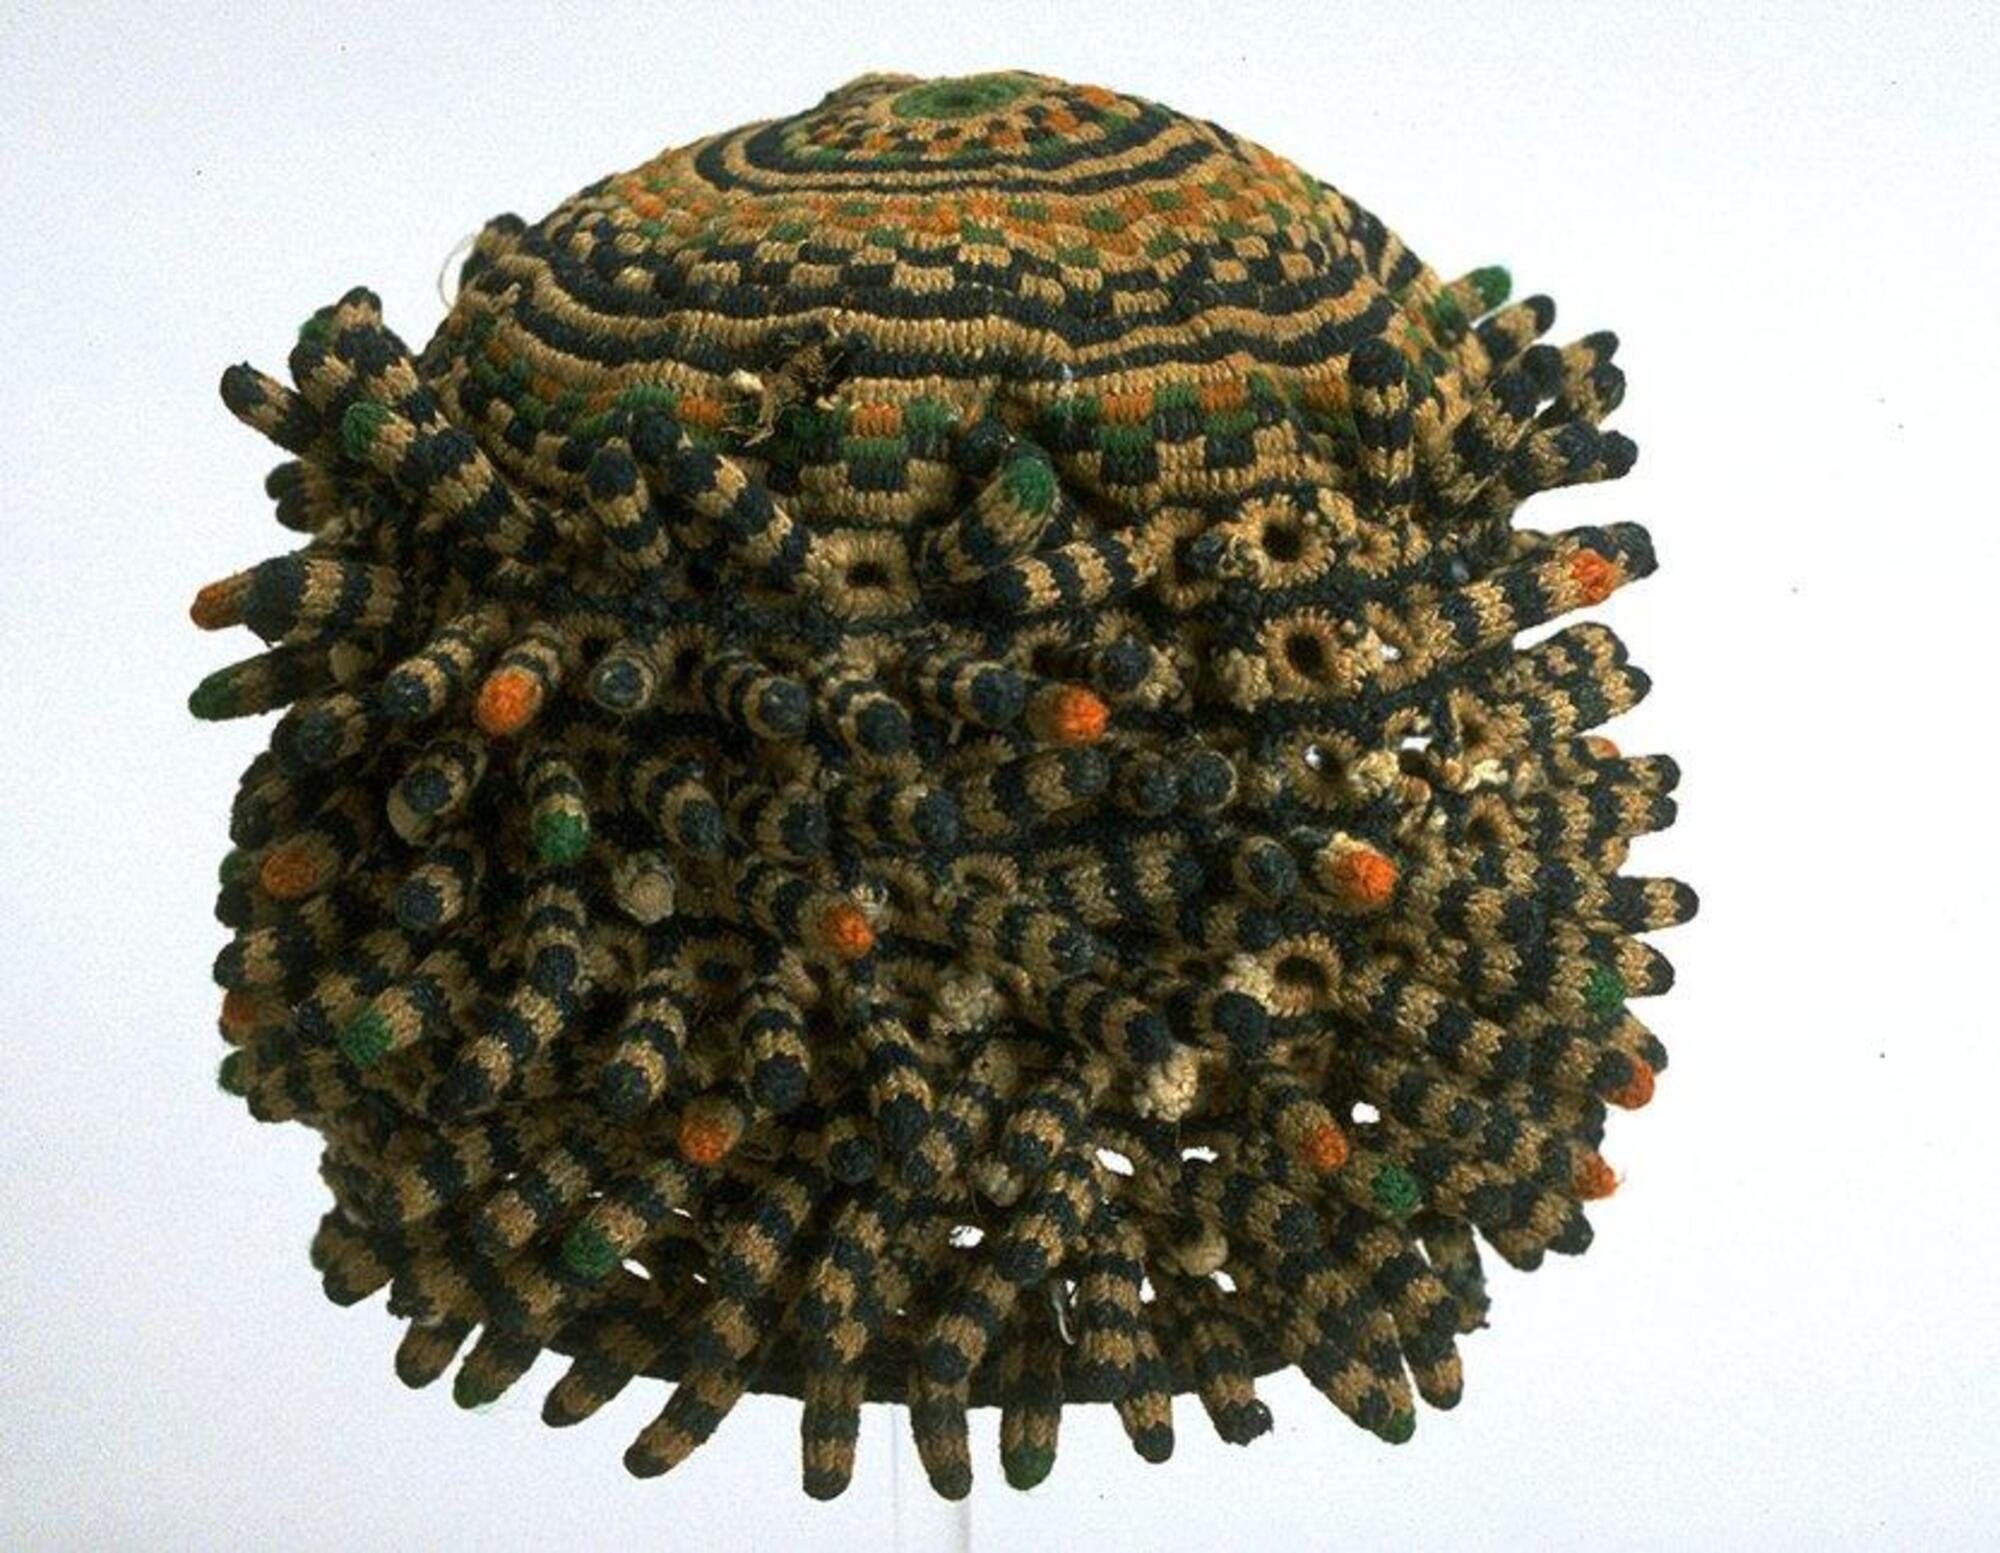 This knitted or crocheted hat in a tall, cylindrical shape has concentric circles and checkerboard patterns decorating the top. The body of the hat is made of small open circles and short rod-like projections. 